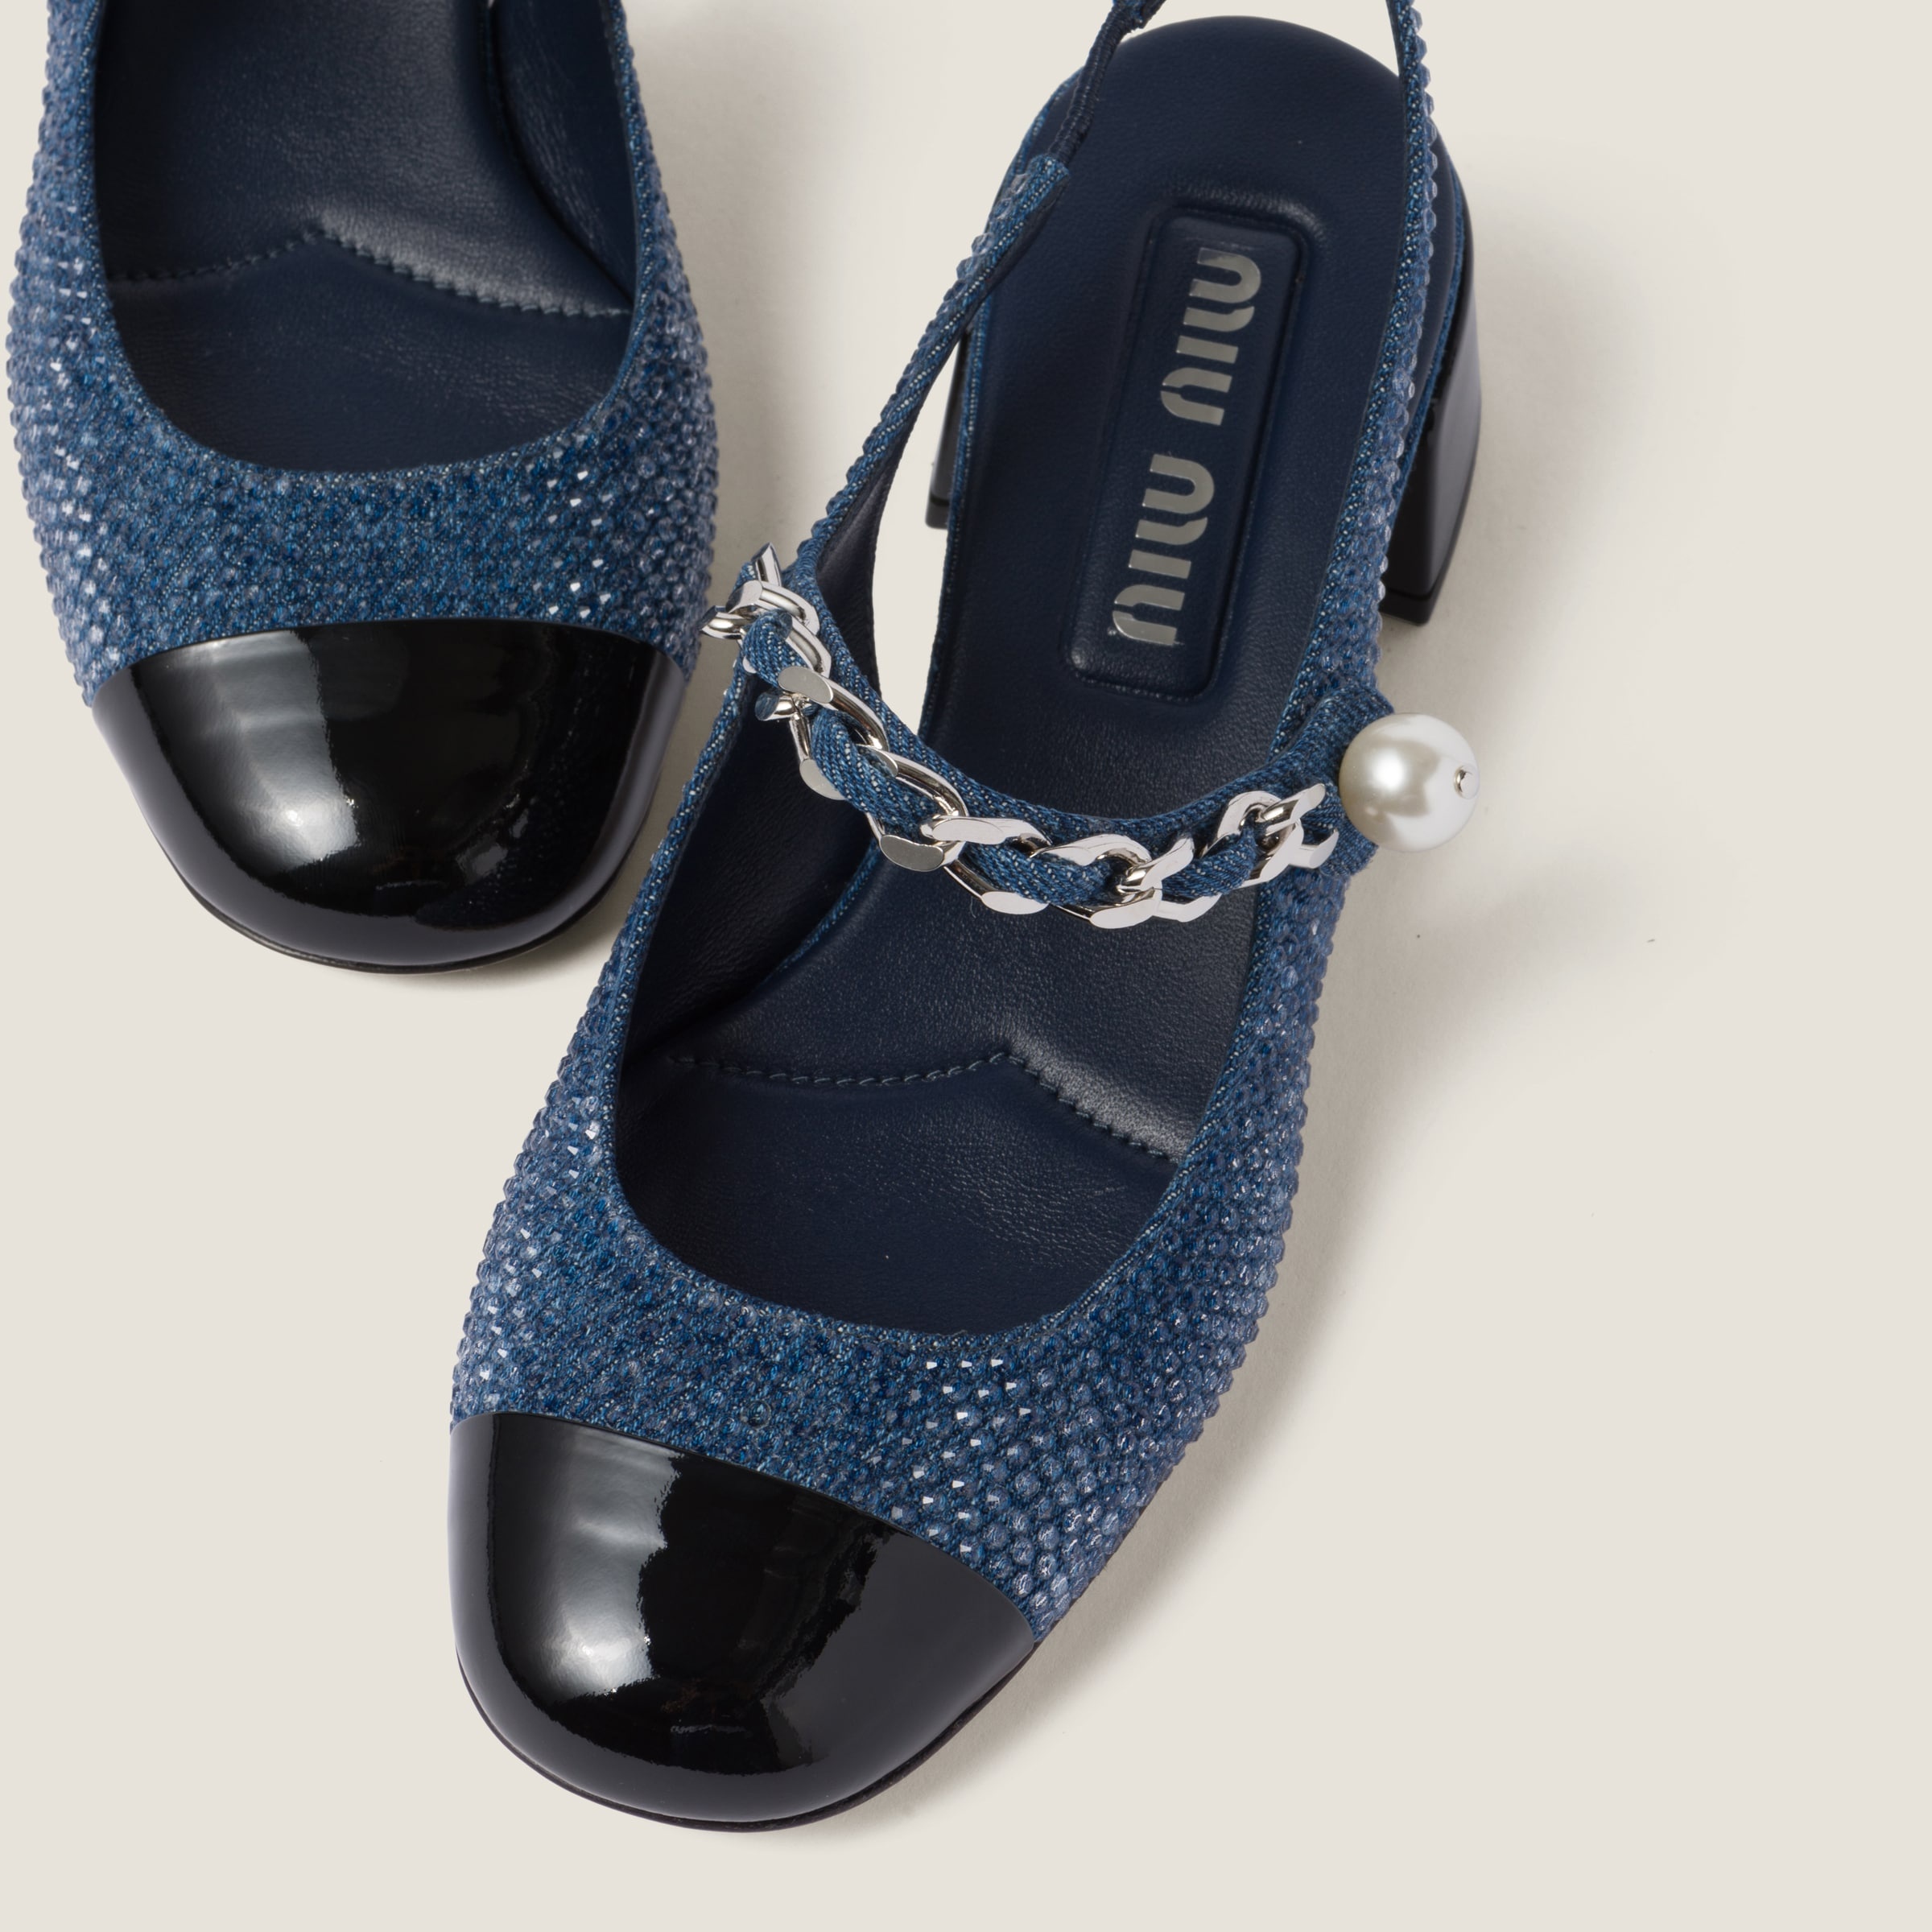 Denim and patent leather slingback pumps with artificial crystals - 4